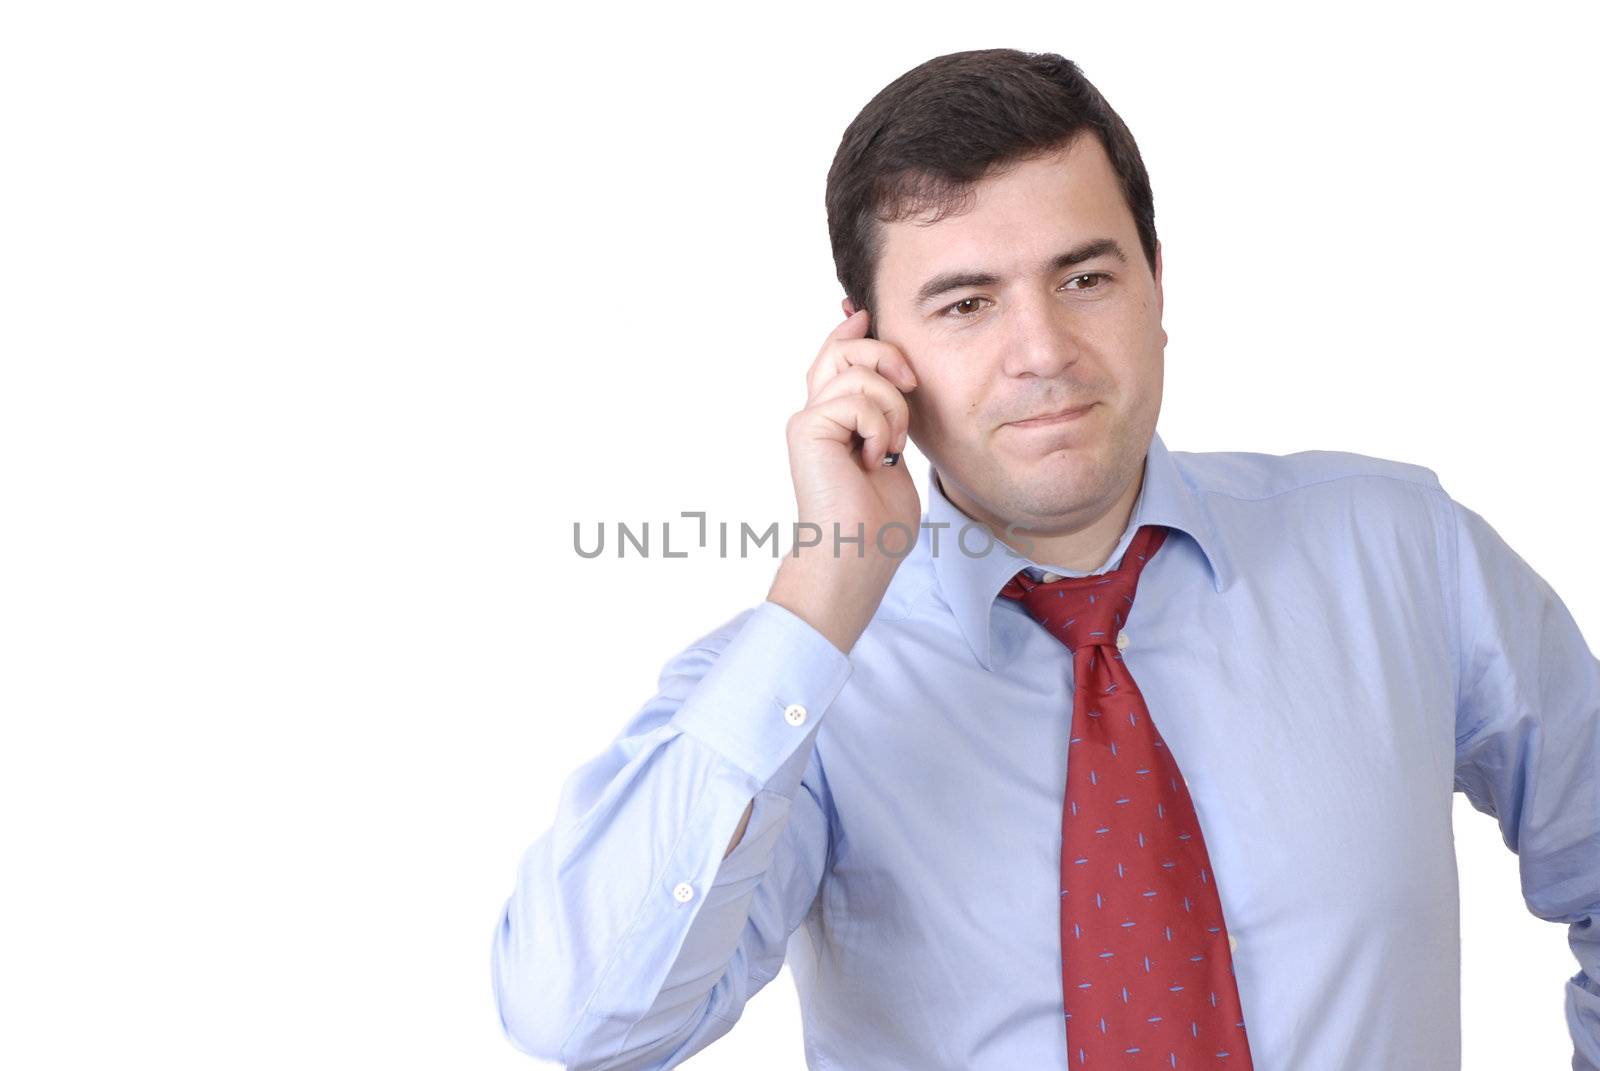 young man on the phone in white background